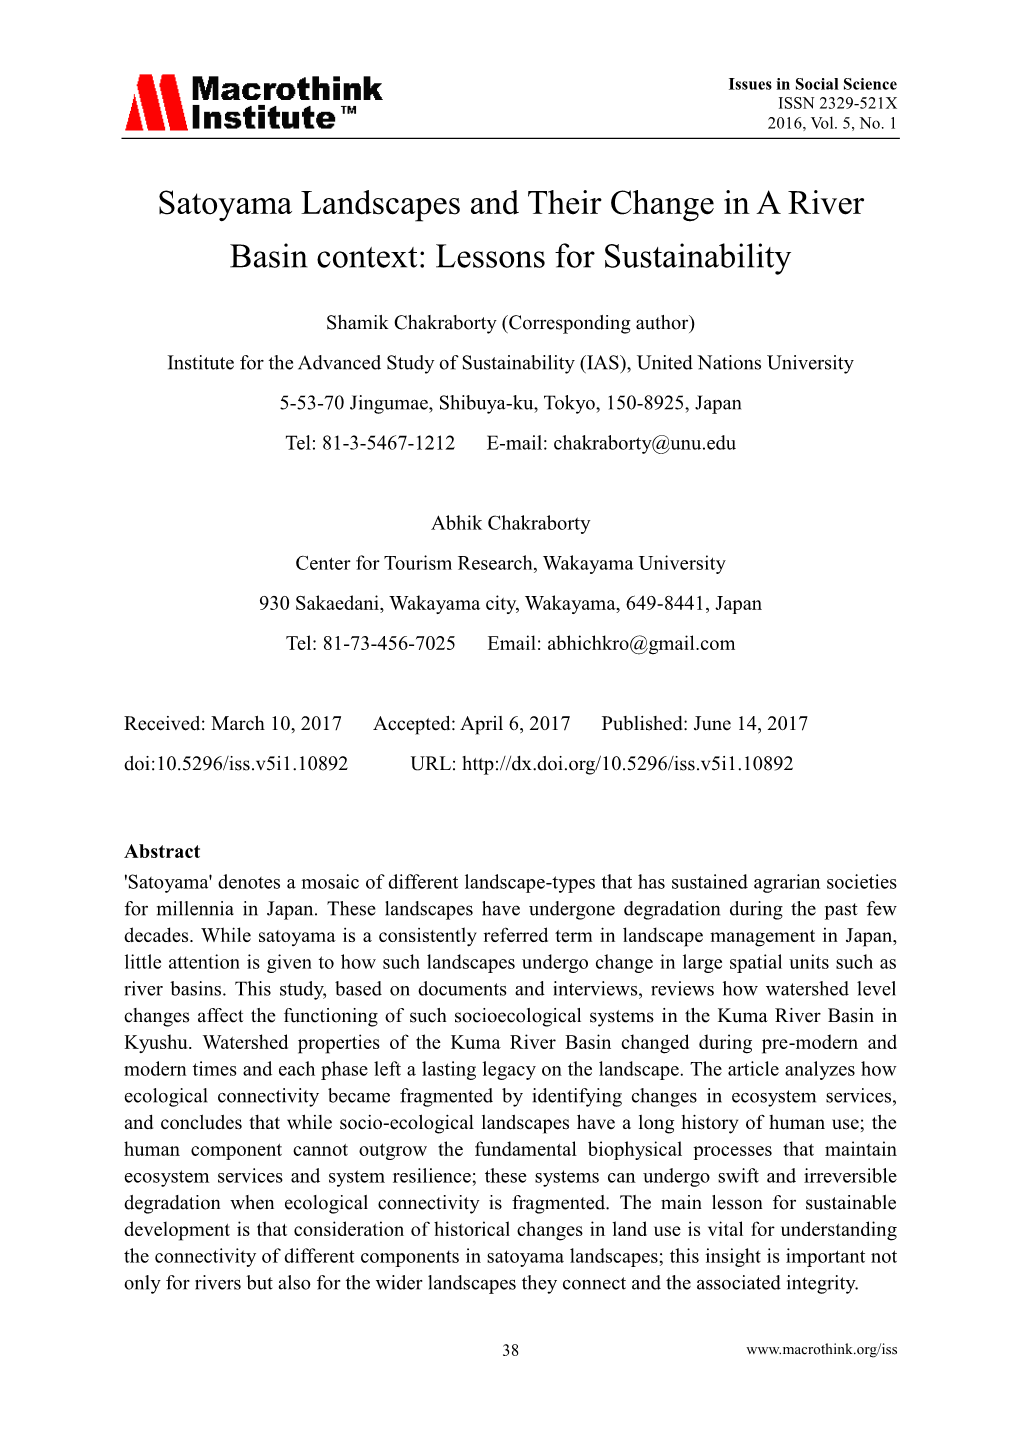 Satoyama Landscapes and Their Change in a River Basin Context: Lessons for Sustainability